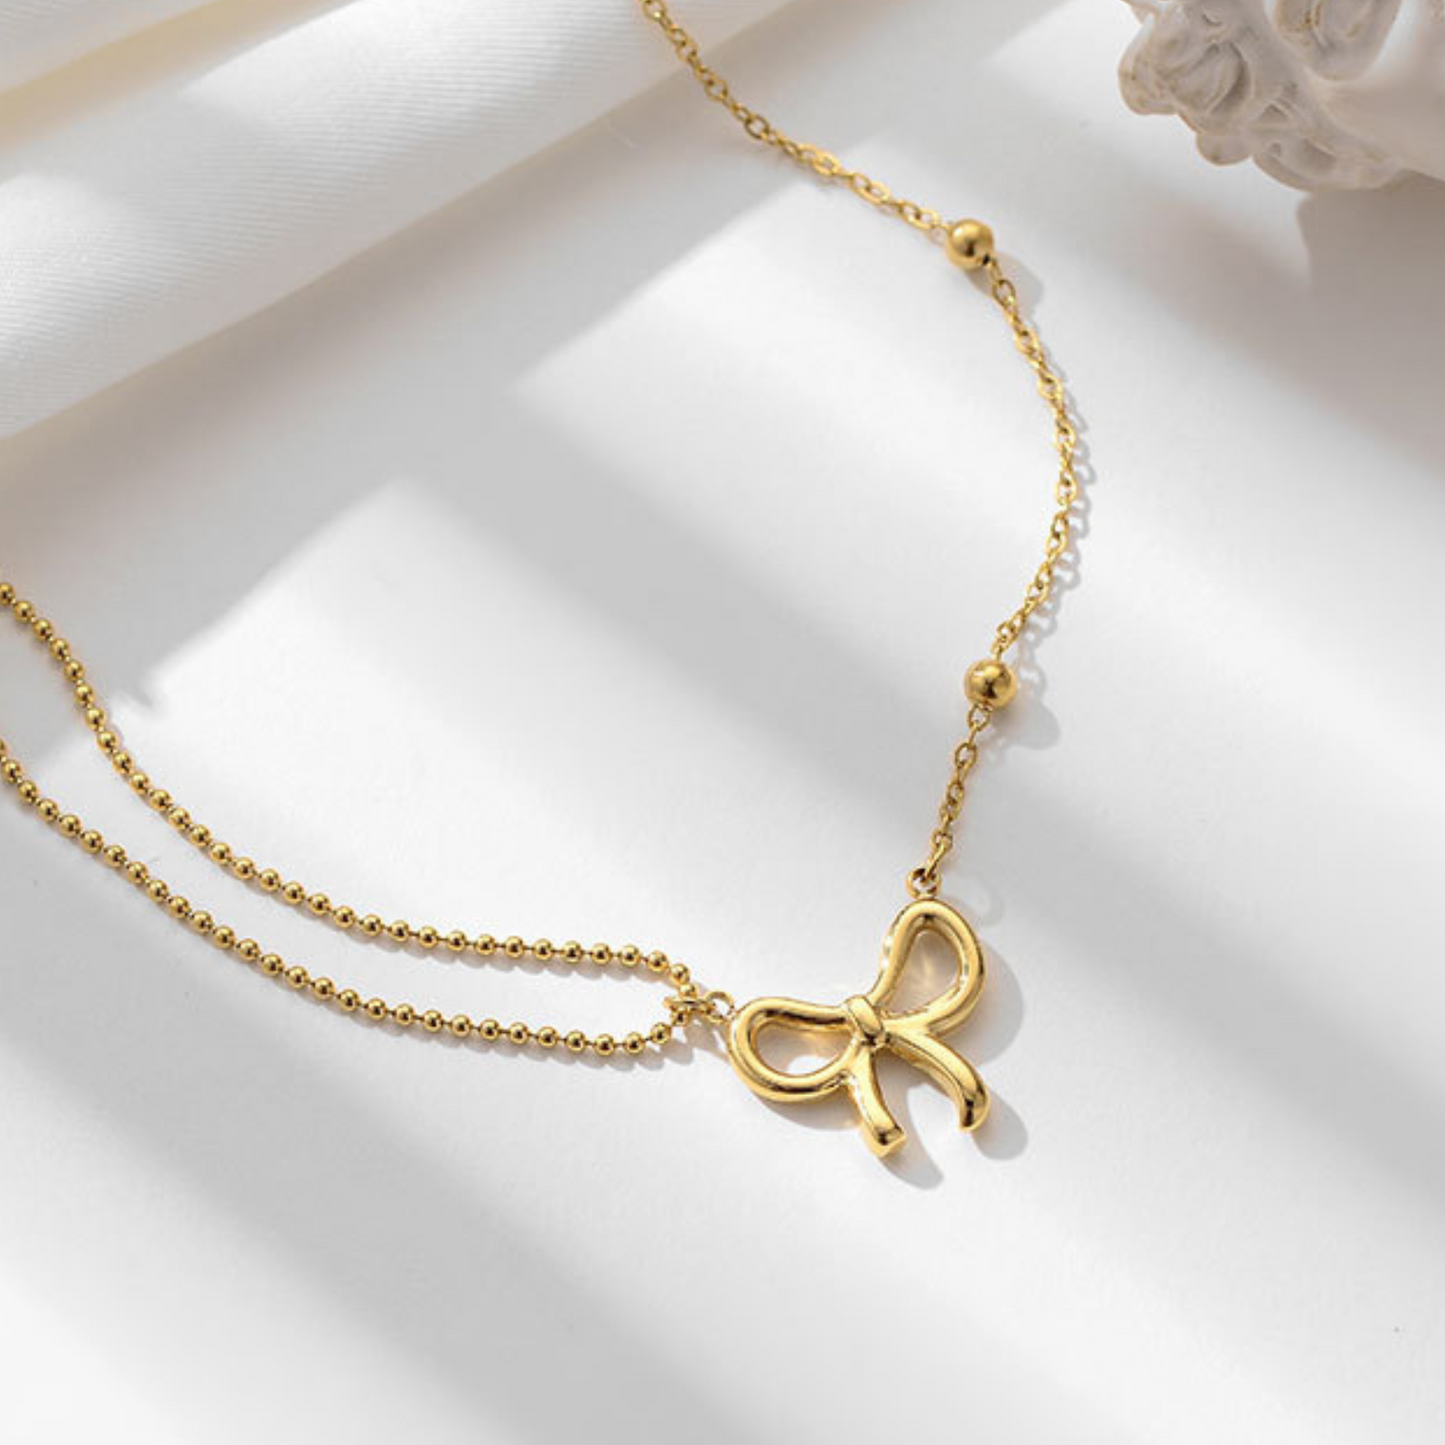 Minimalist Gold Chain Butterfly Pendant Necklace for Women